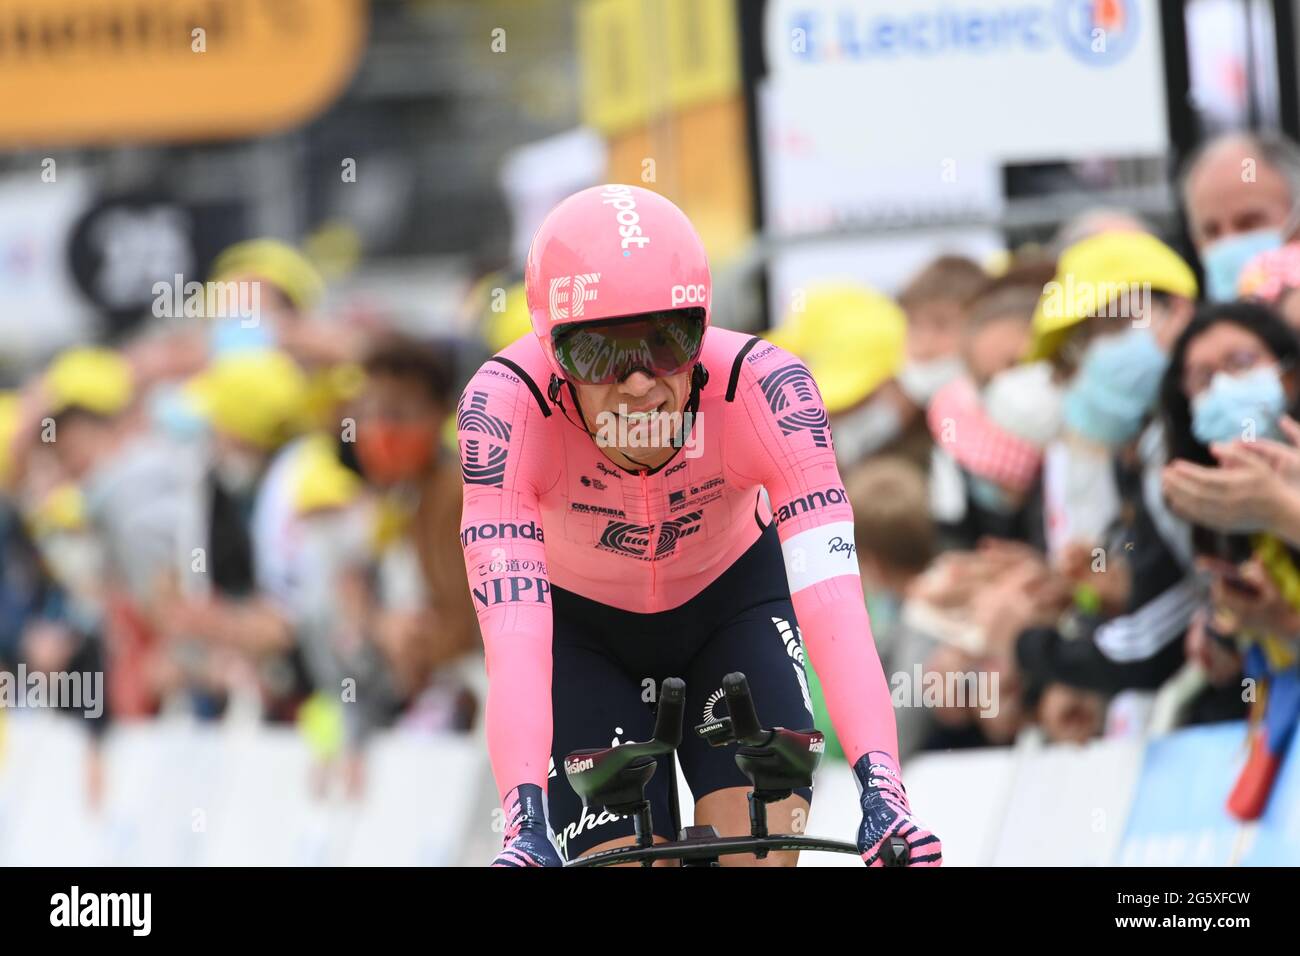 Laval, France. 30th June, 2021: Tour de France 2021, Stage 5, Individual Time Trial from Change to Laval. Rigoberto Uran team Education First Nippo Credit: Peter Goding/Alamy Live News Stock Photo